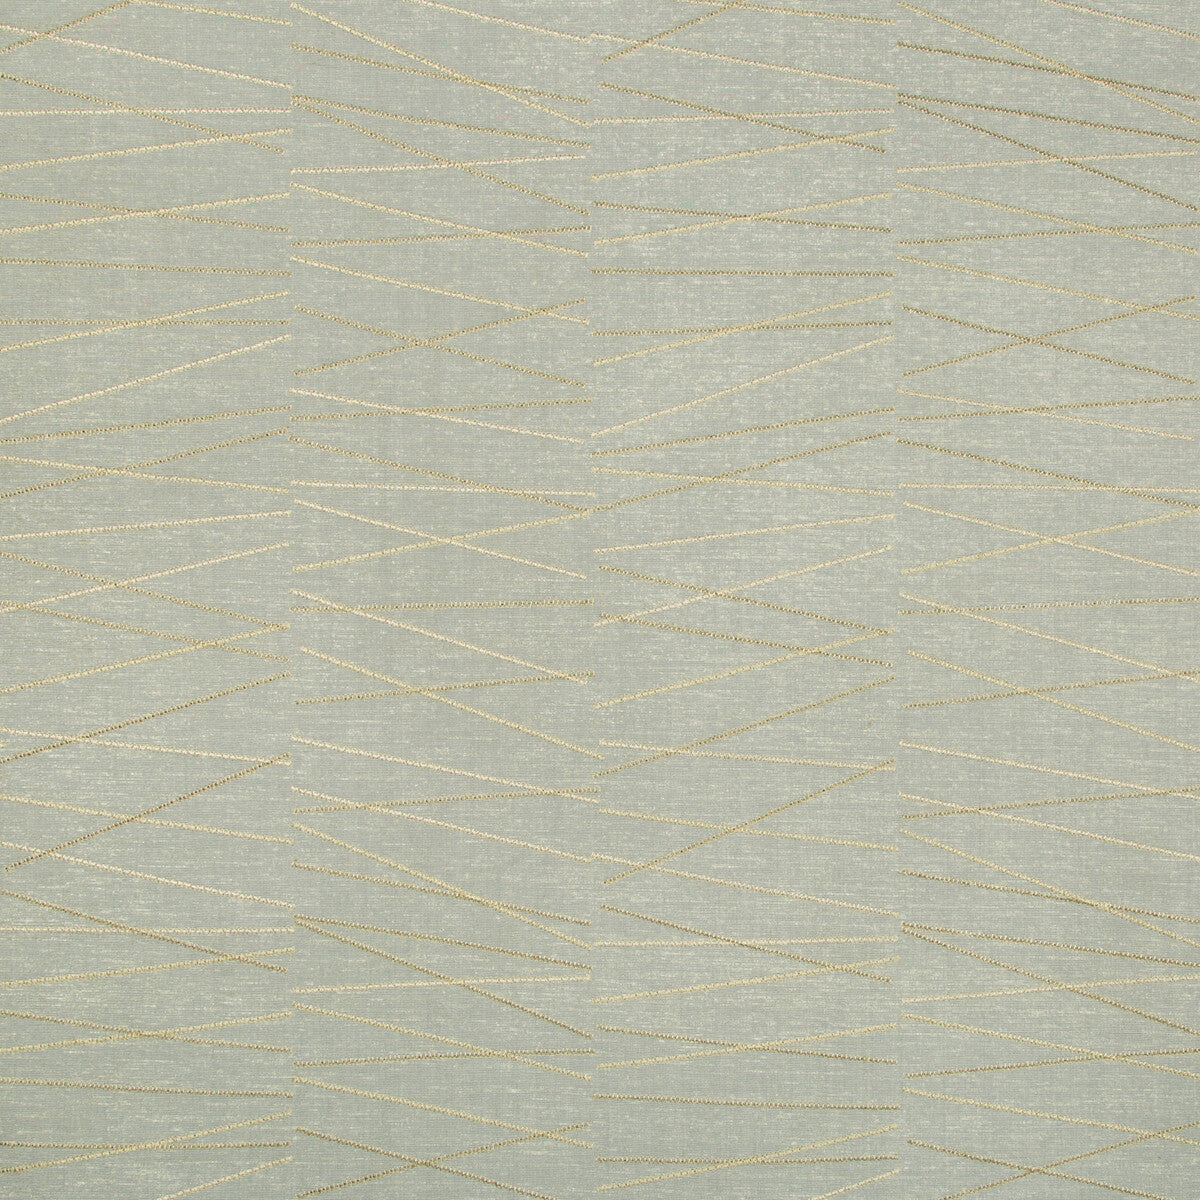 String Theory fabric in mist color - pattern 34827.11.0 - by Kravet Couture in the Barbara Barry Panorama collection